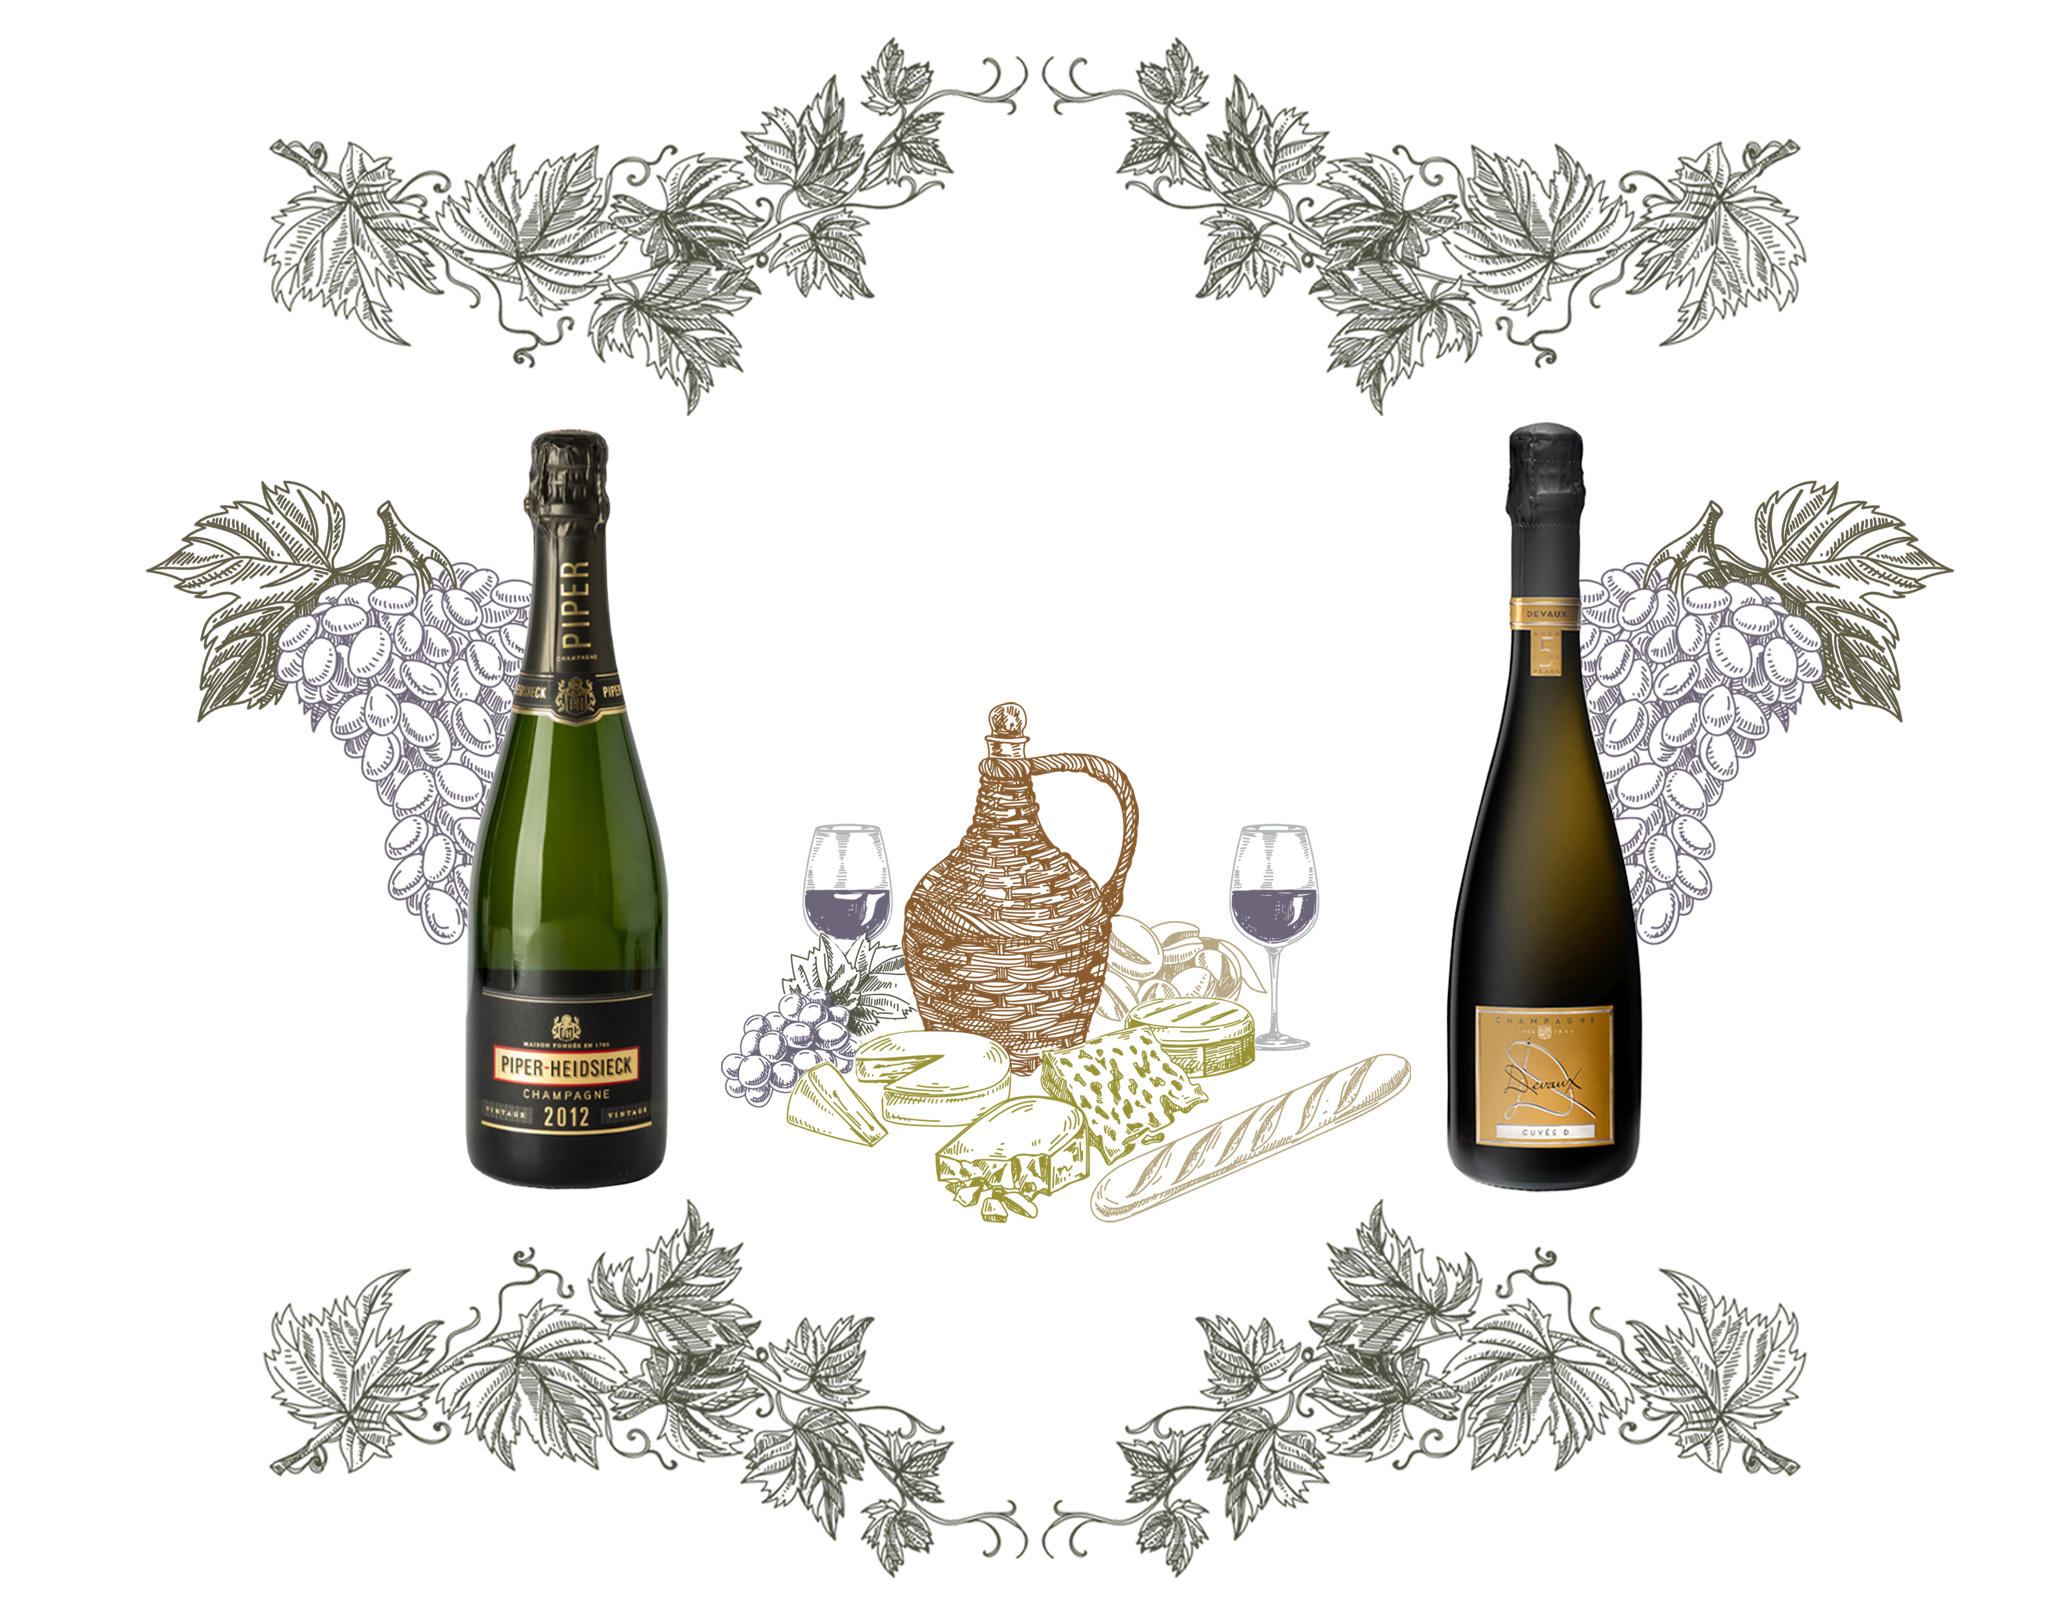 Champagne Brut Vintage 2012 and Cuvée Aged 5 Years Champagne with wine and cheese illustrative decoration